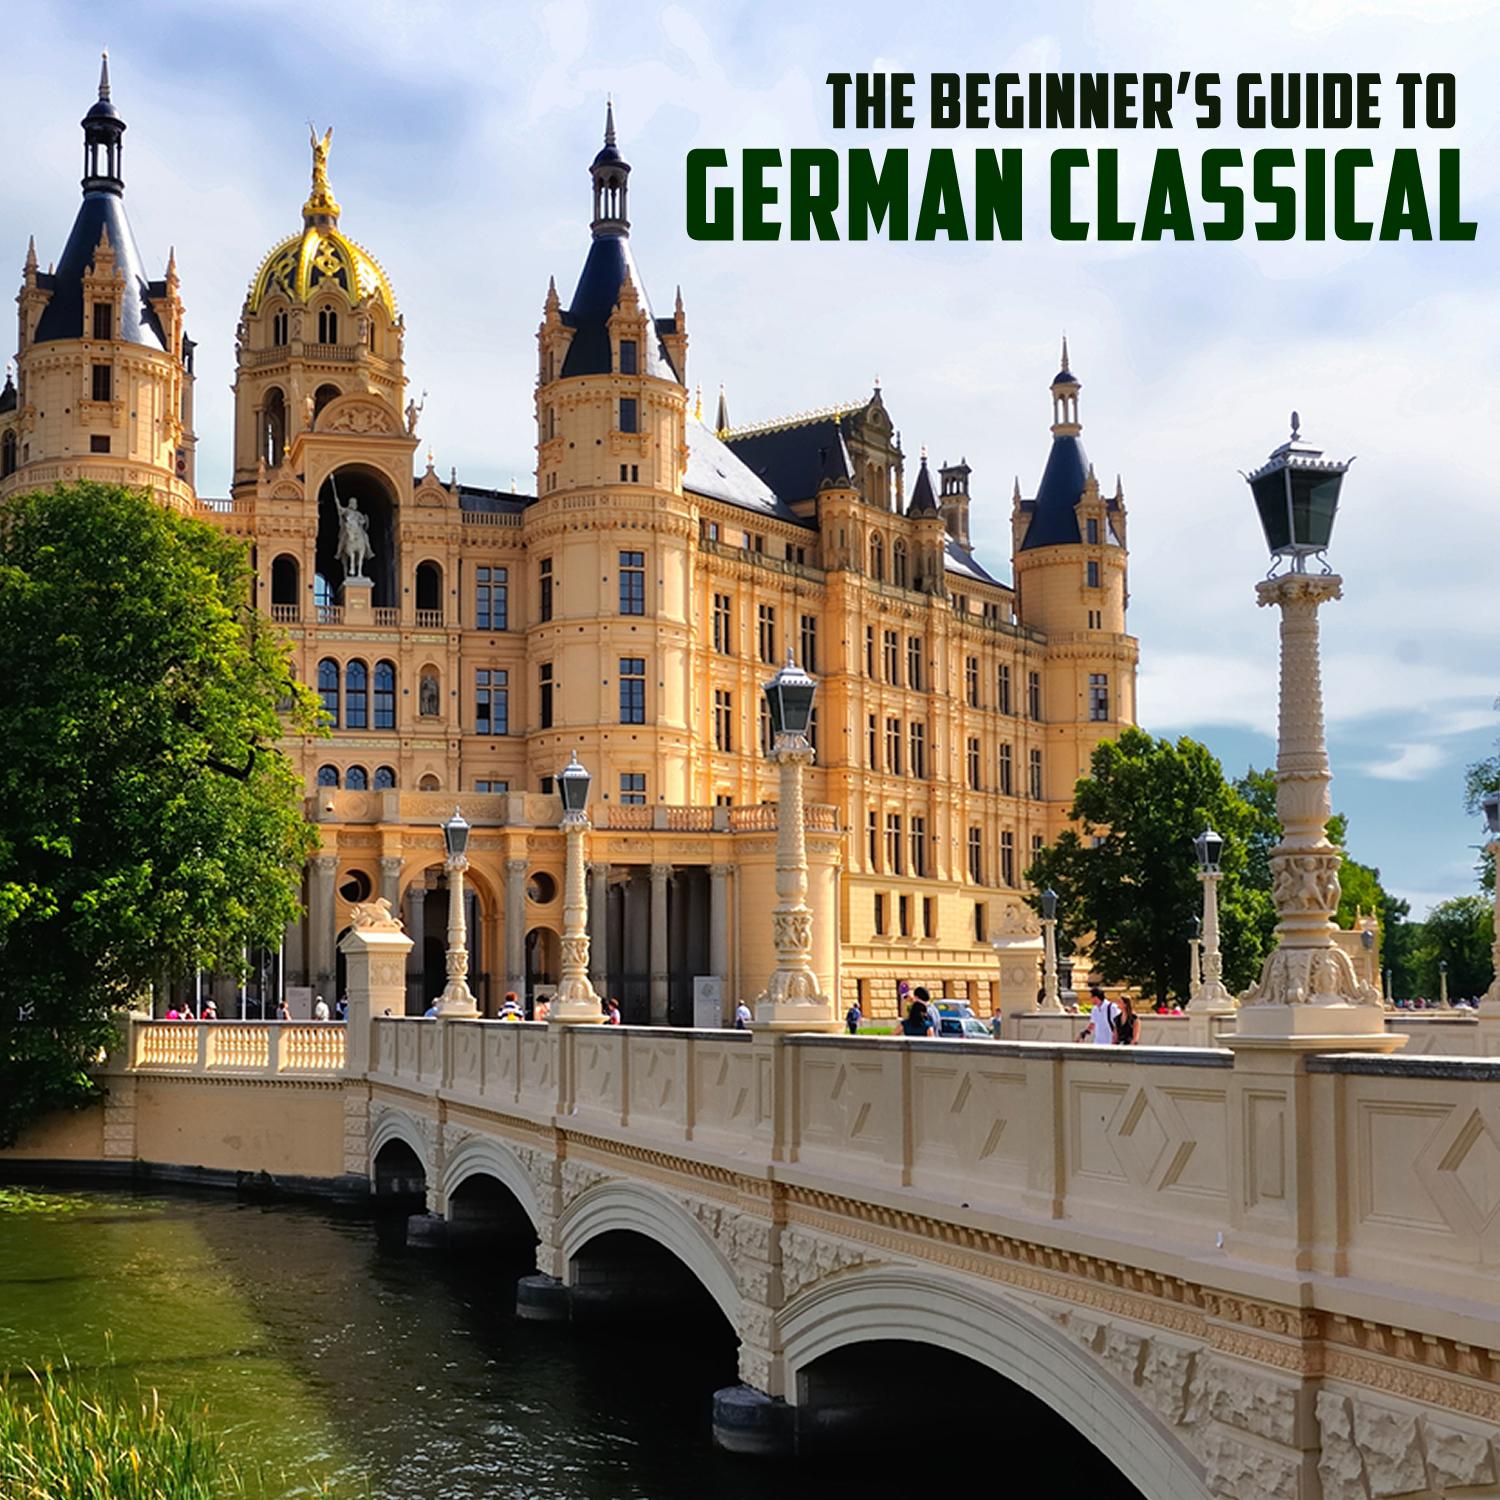 The Beginner's Guide to German Classical Music: Bach, Beethoven, Mozart & More